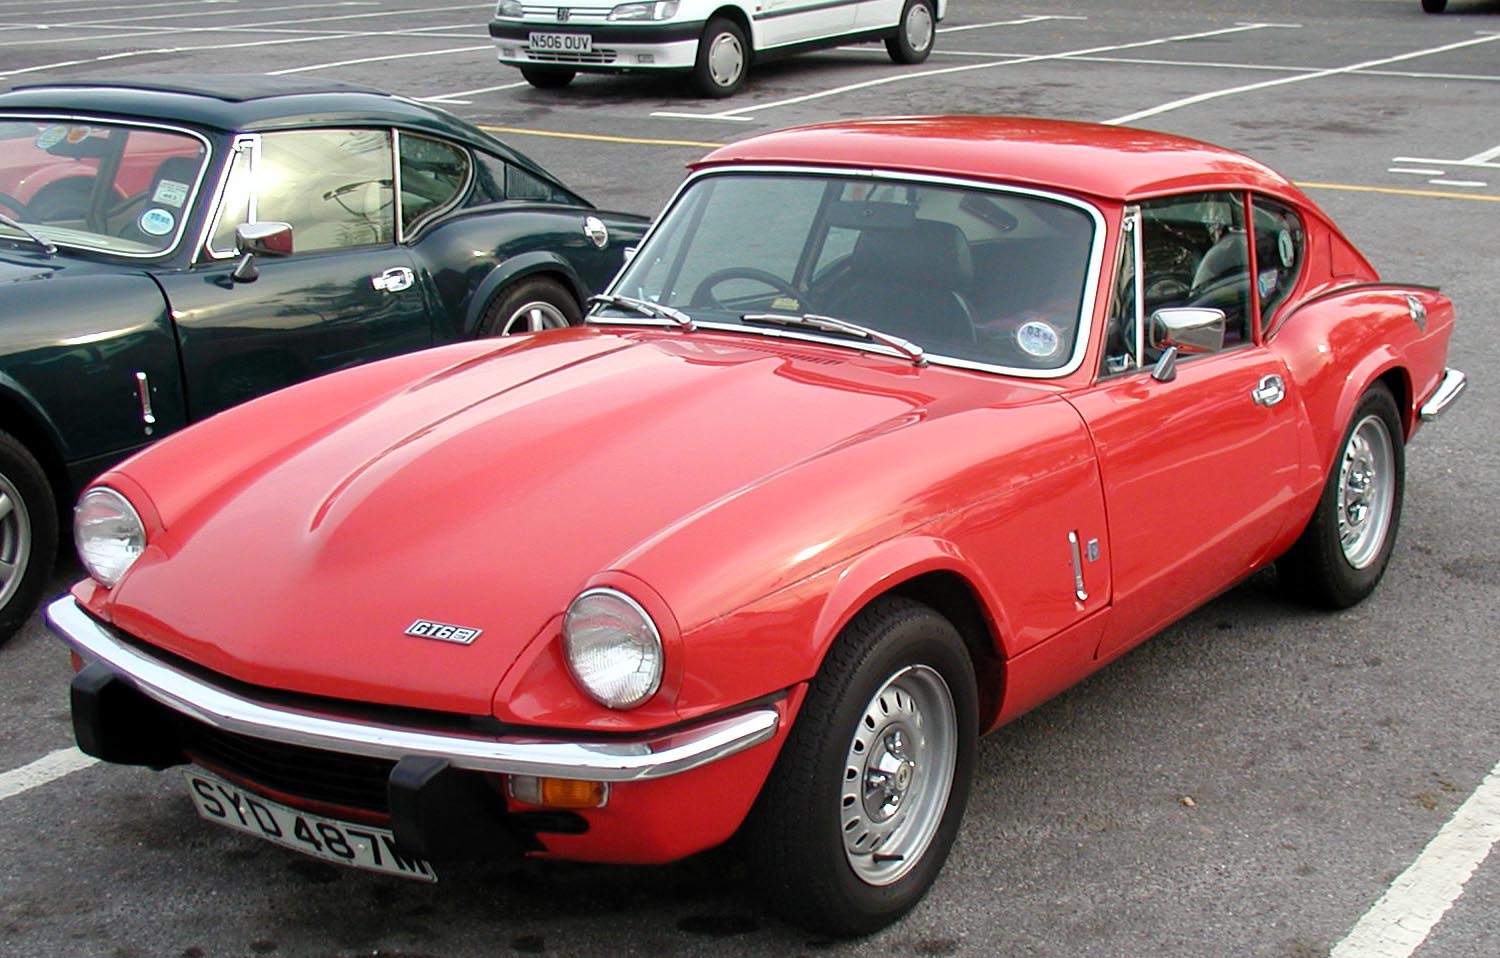 File:1973.triumph.gt6.red.arp.jpg - Wikimedia Commons